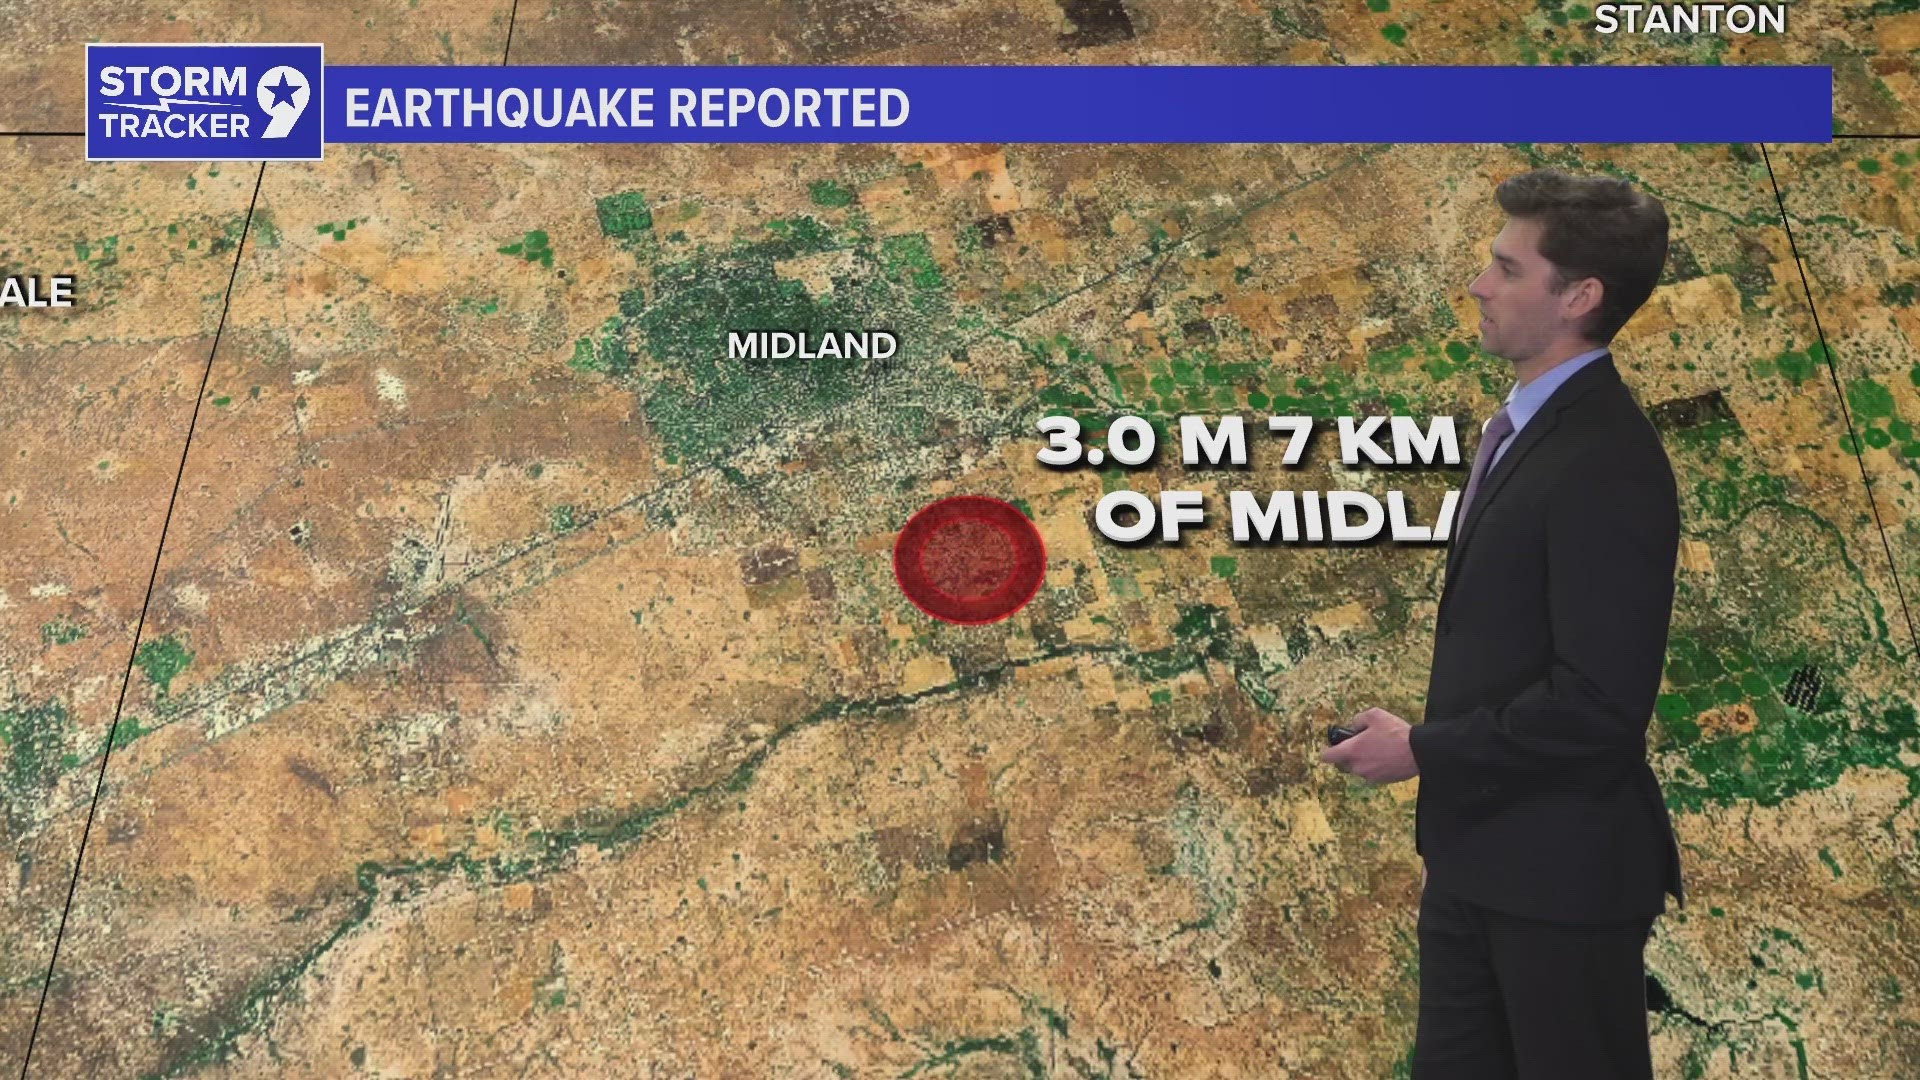 NewsWest 9 can confirm that a 3.0 earthquake was recorded seven kilometers southeast of Midland.